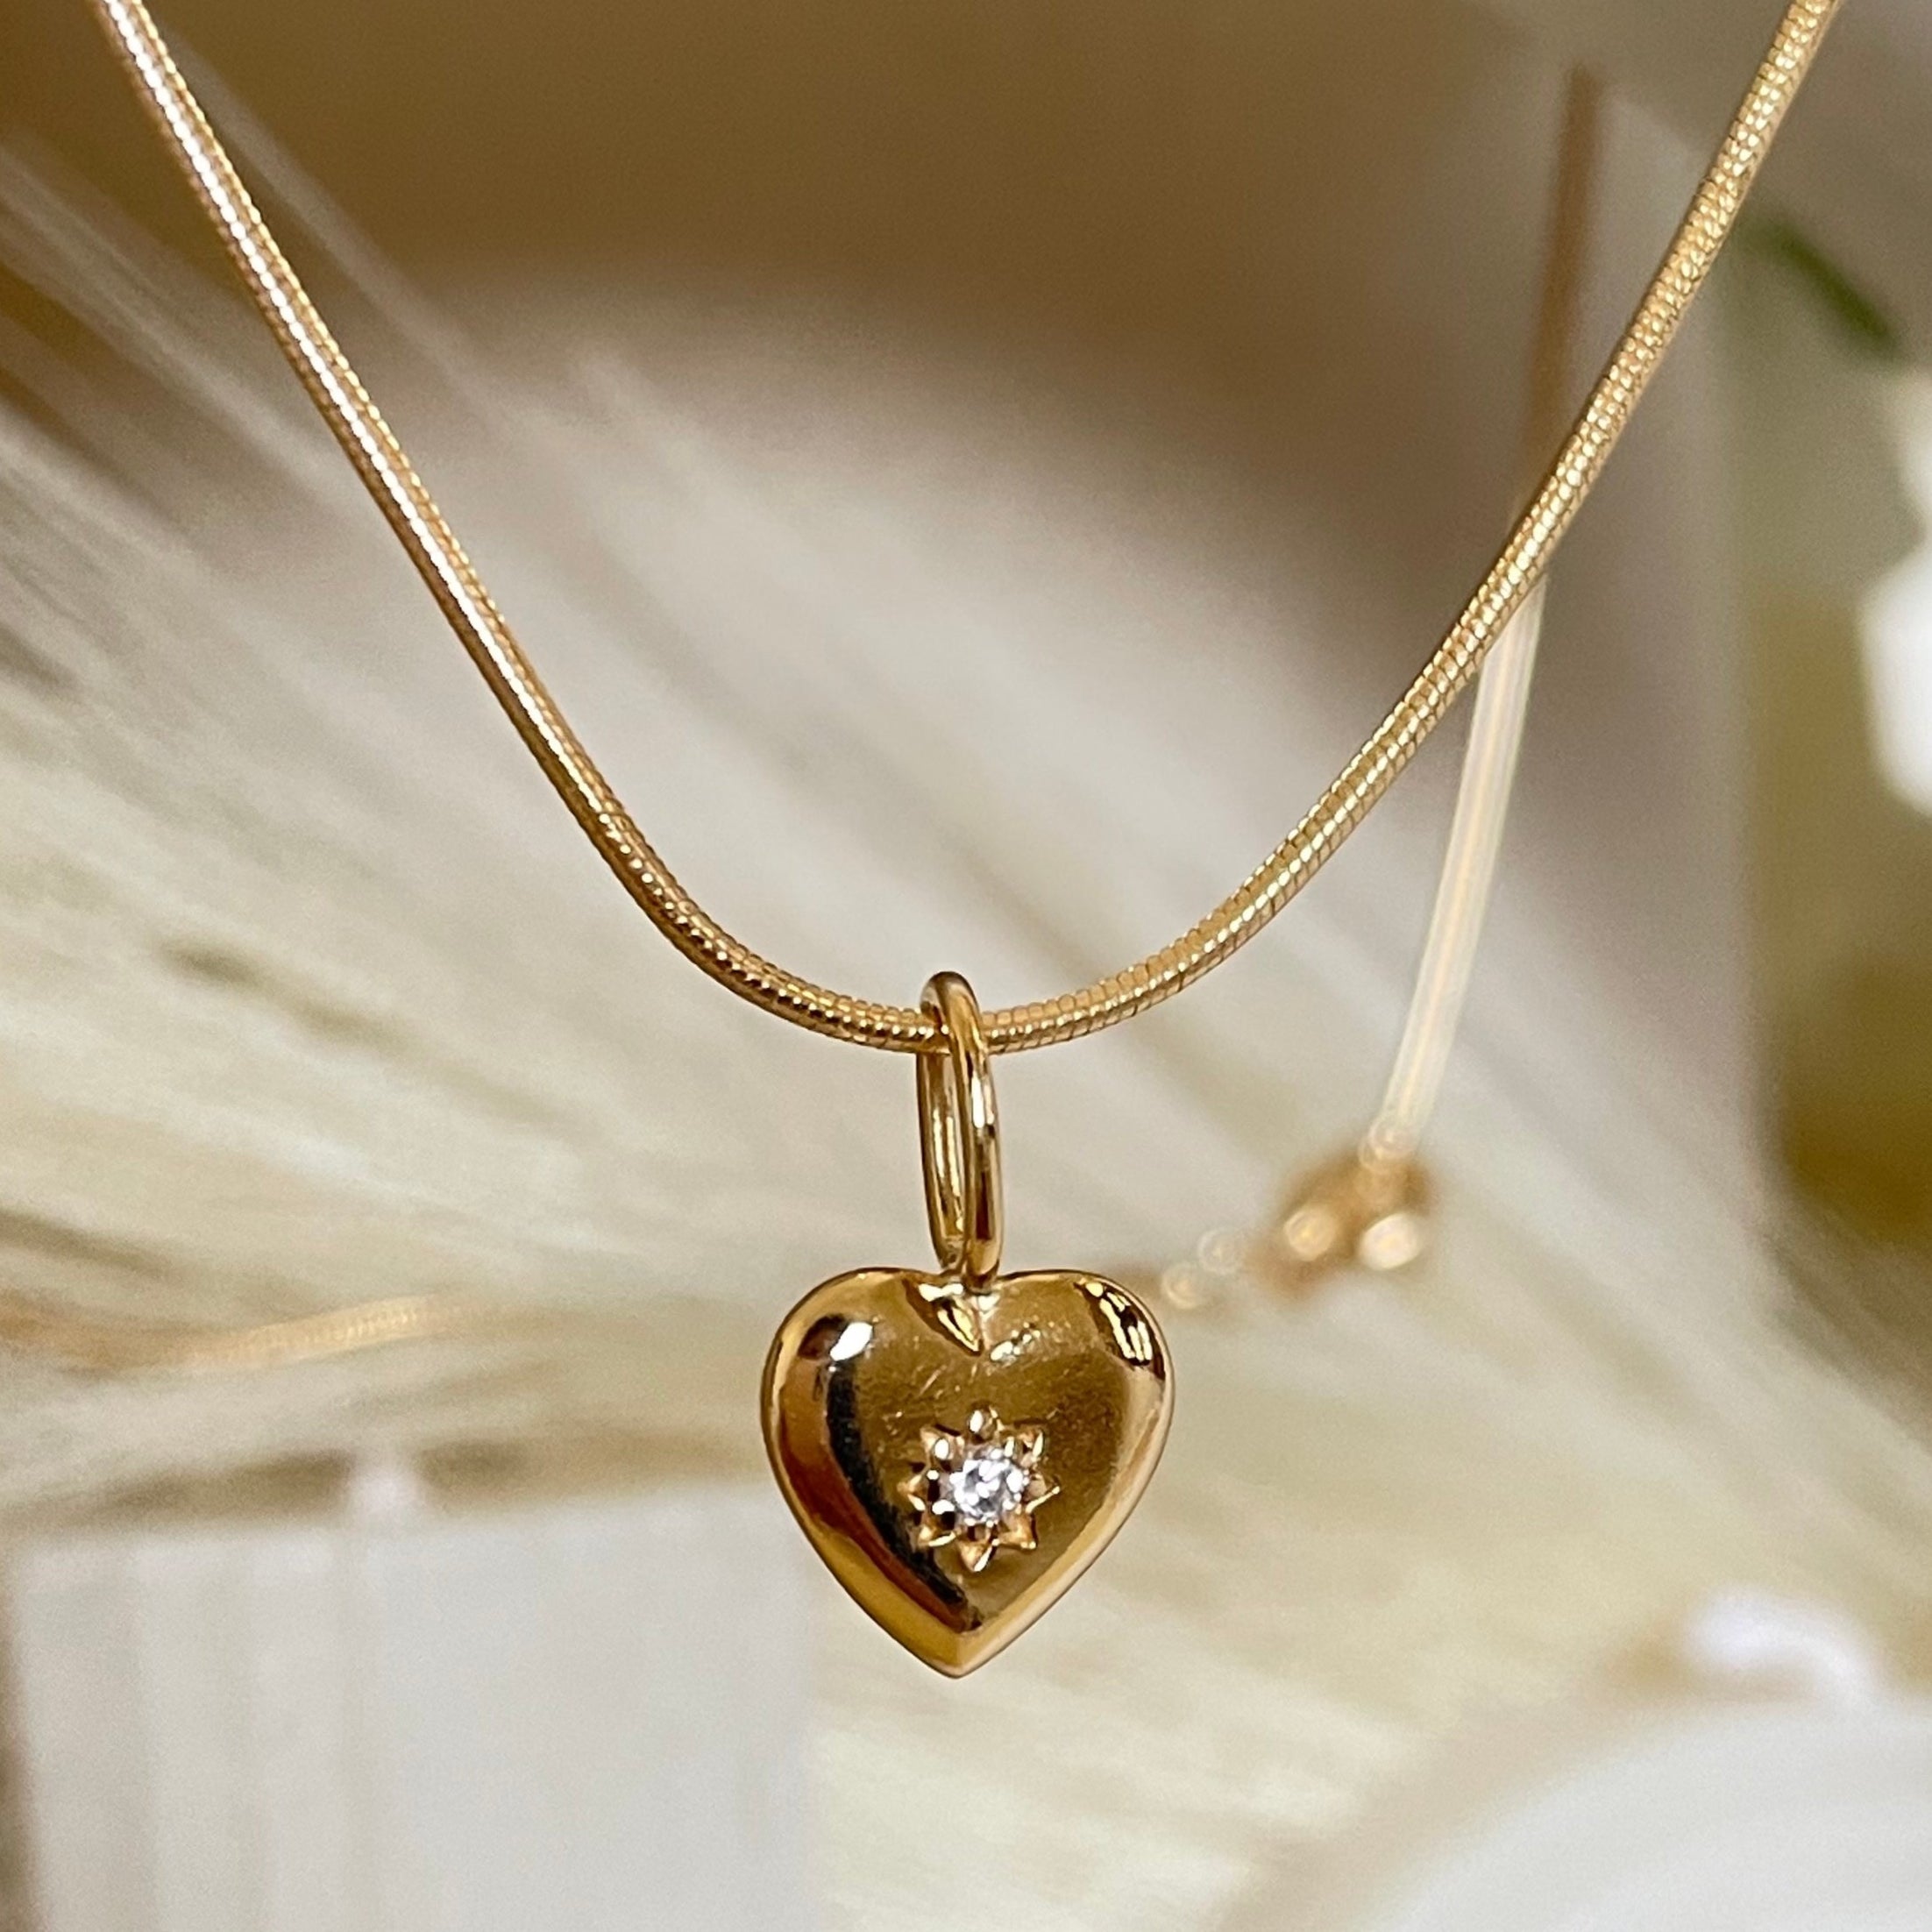 Vintage Heart Studded Minimal Necklace with Snake Chain - Octonov 